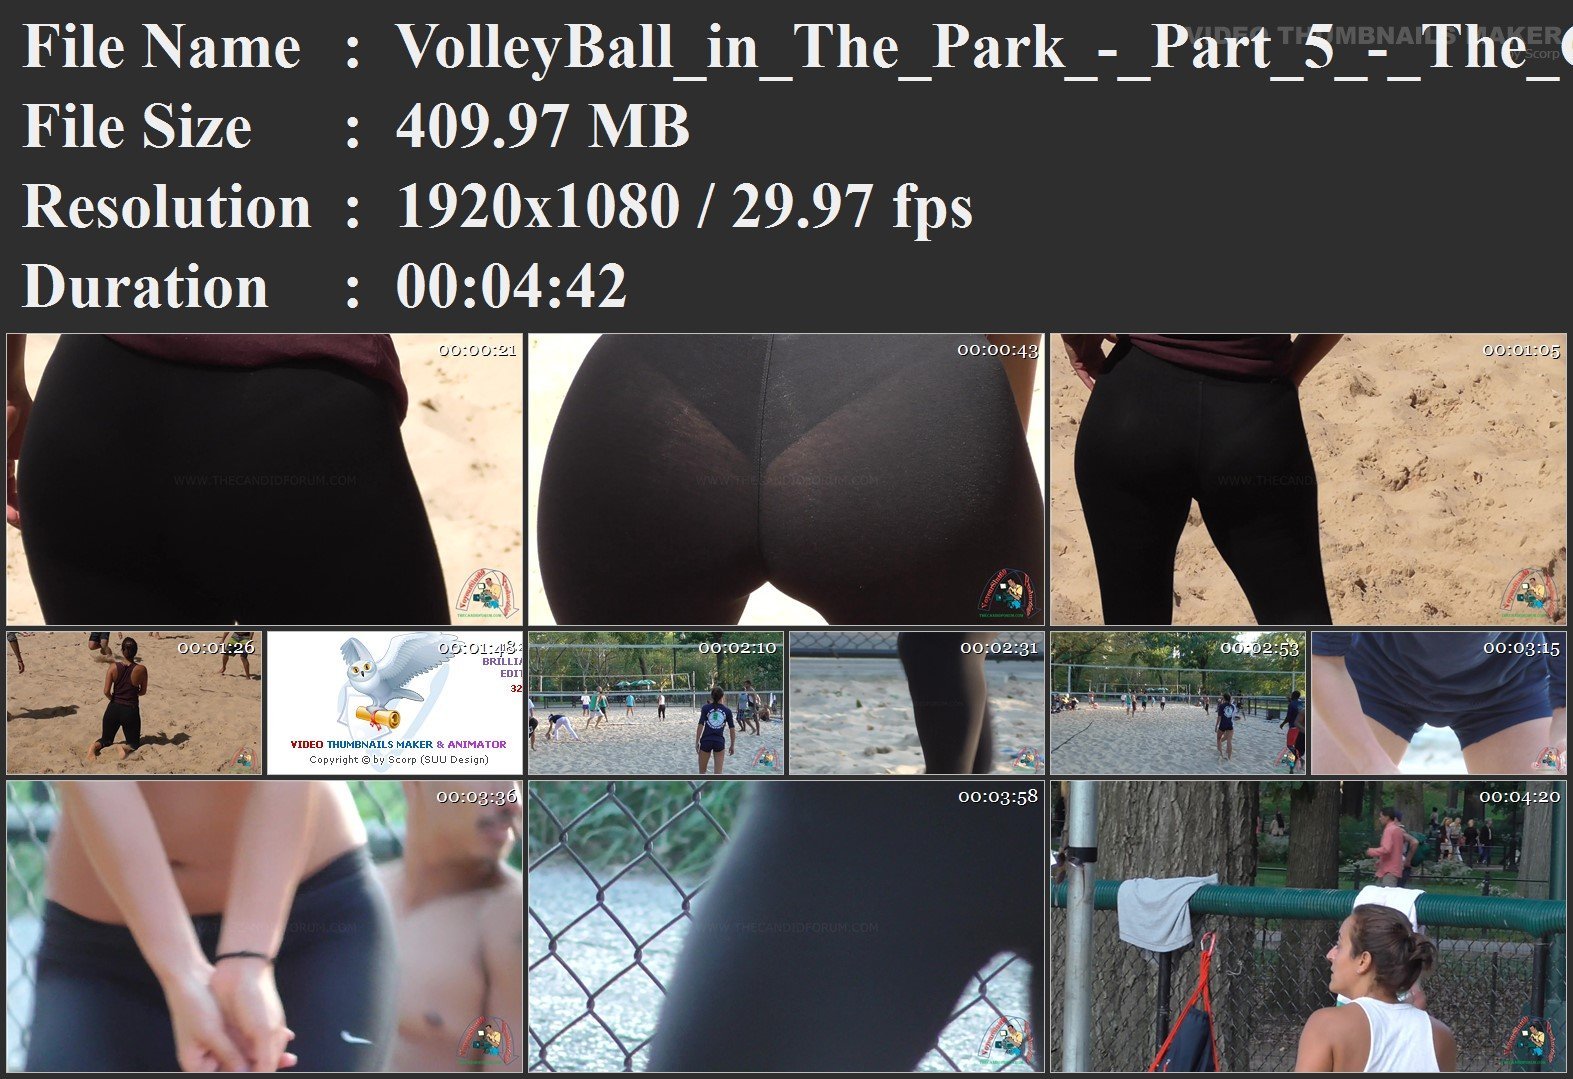 VolleyBall_in_The_Park_-_Part_5_-_The_Compilation.mp4.jpg